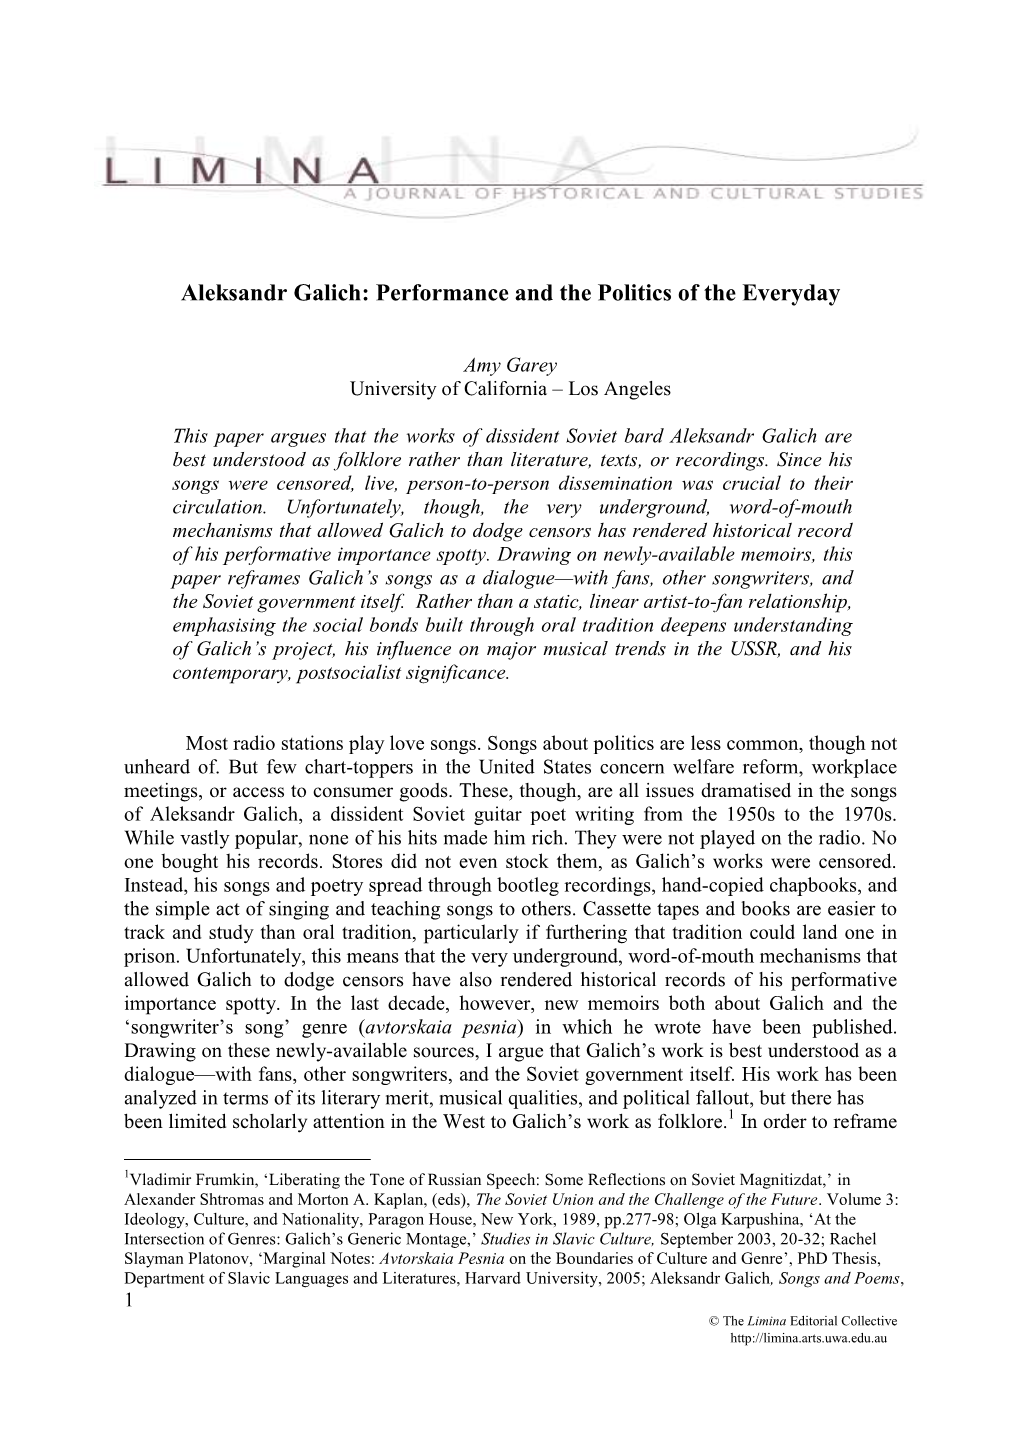 Aleksandr Galich: Performance and the Politics of the Everyday